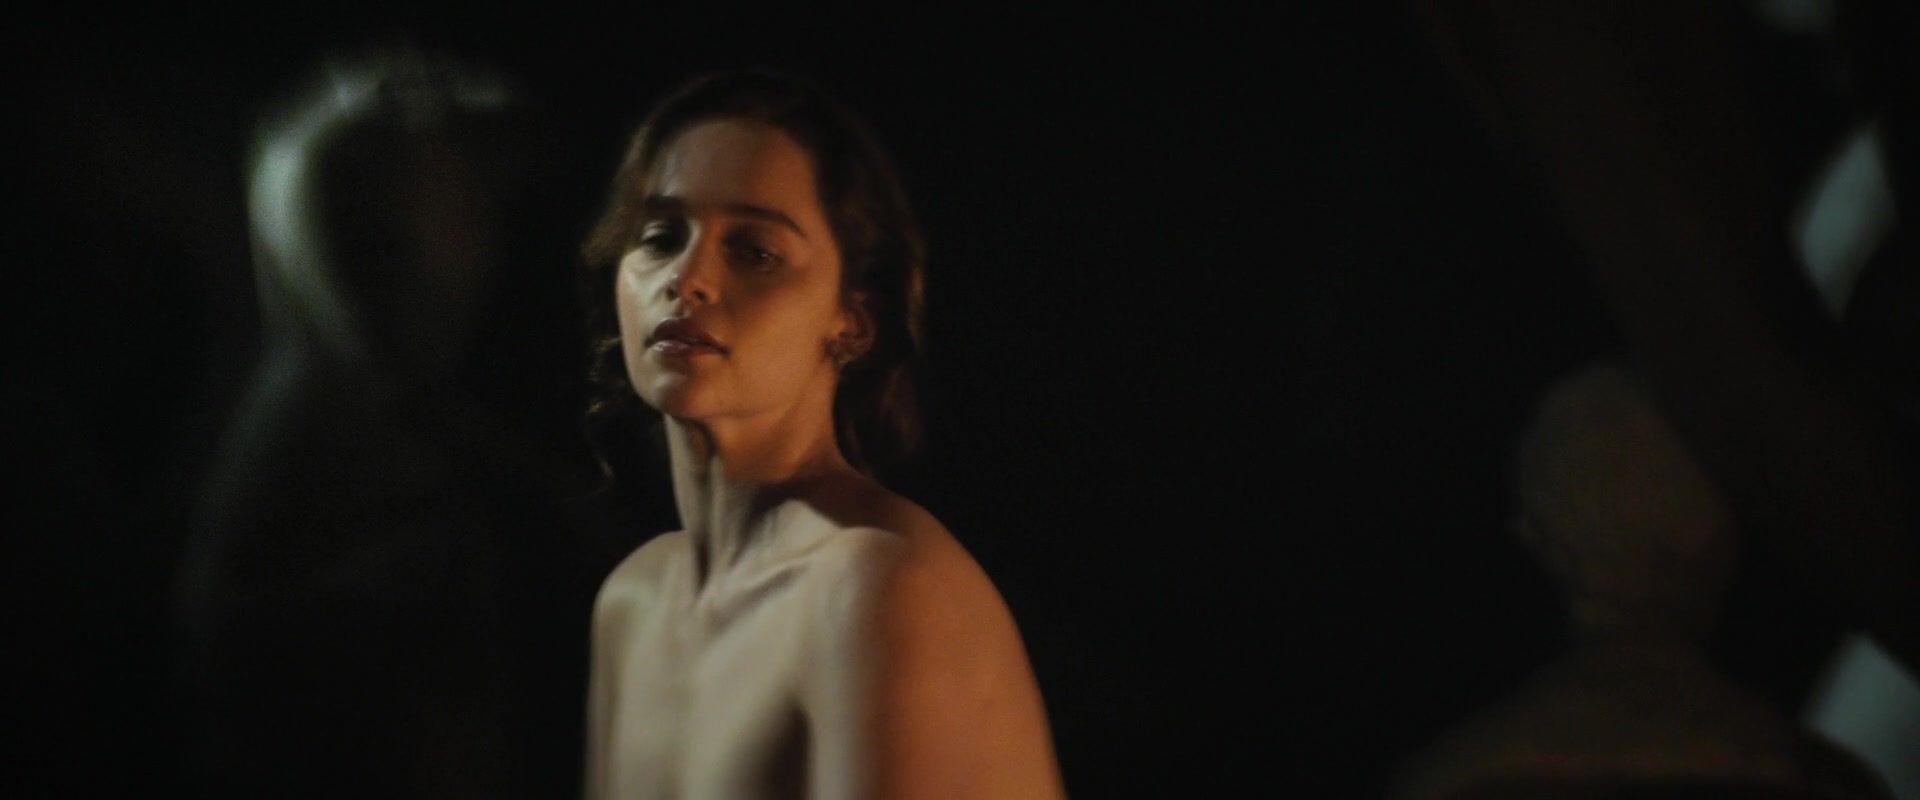 Pierced Naked Emilia Clarke in topless scene of the movie "Voice from the Stone" | Released in 2017 Redbone - 2